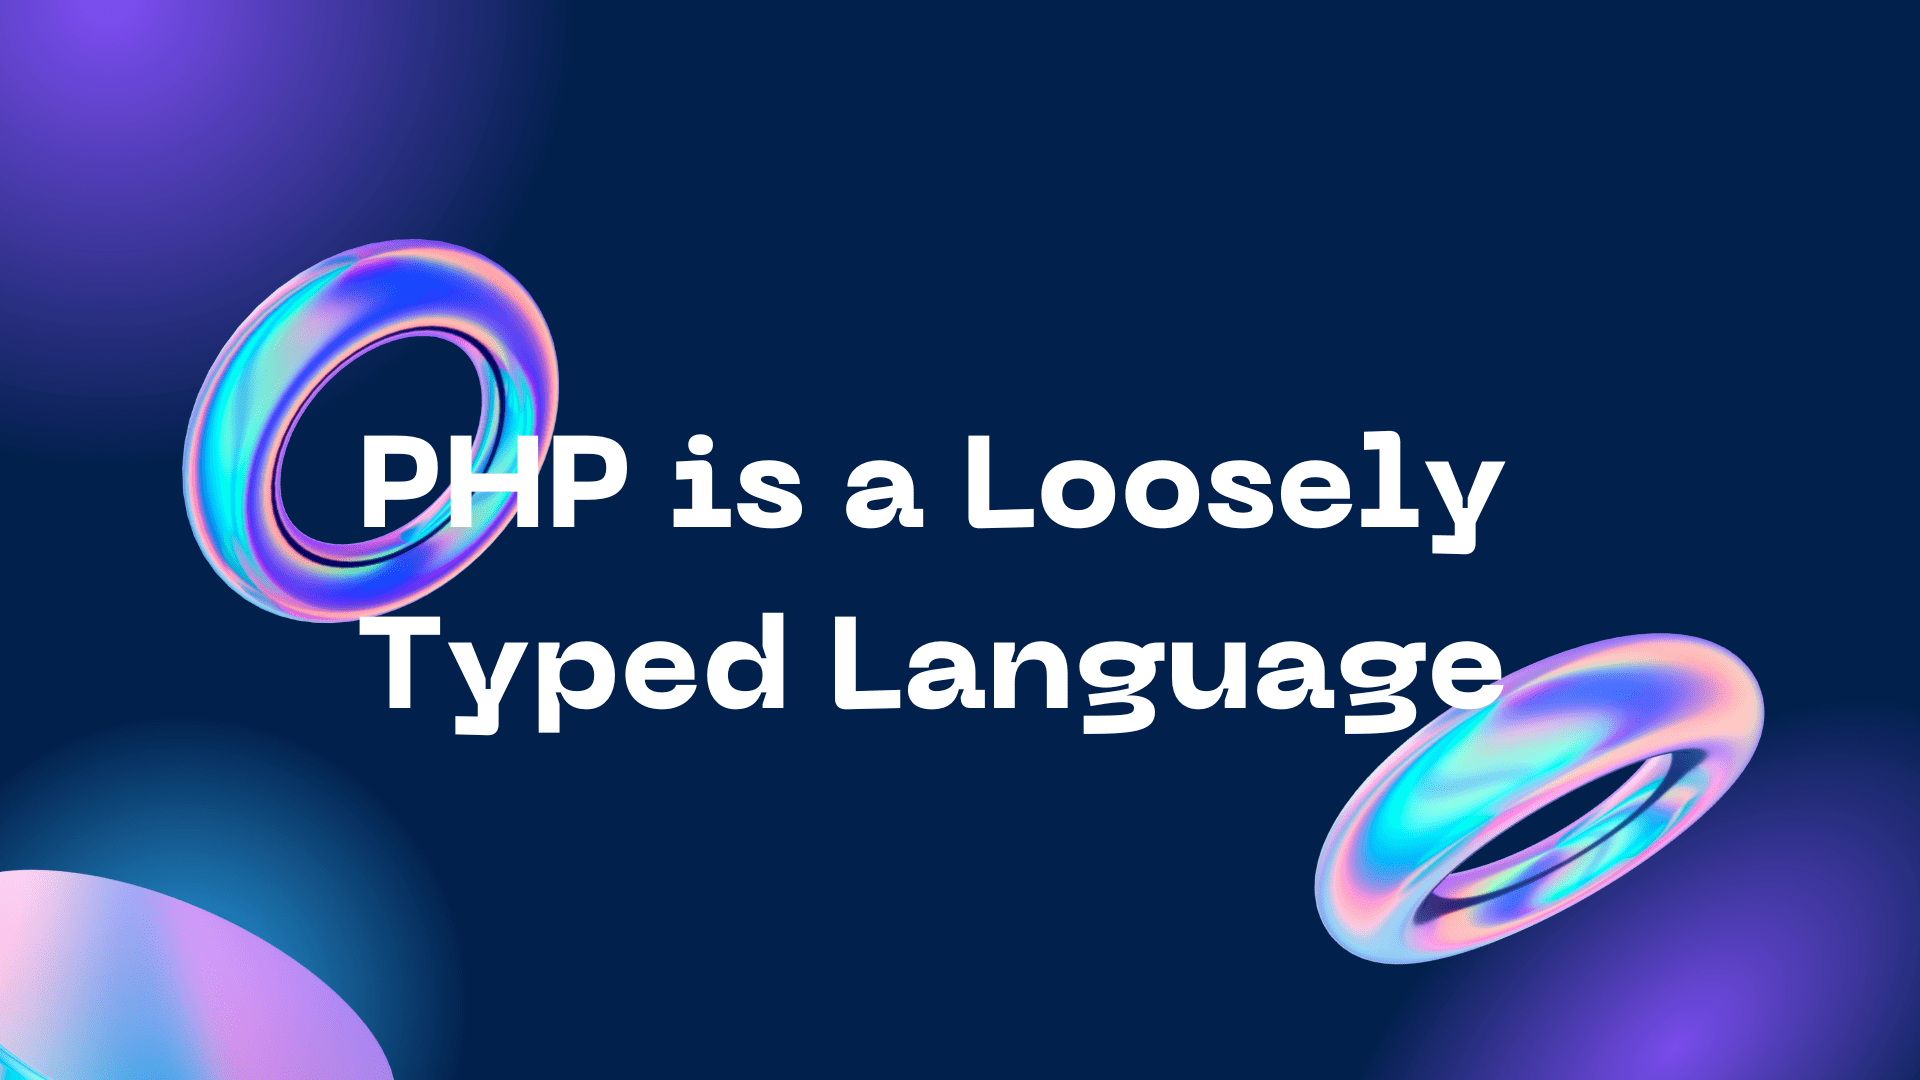 PHP is a Loosely Typed Language